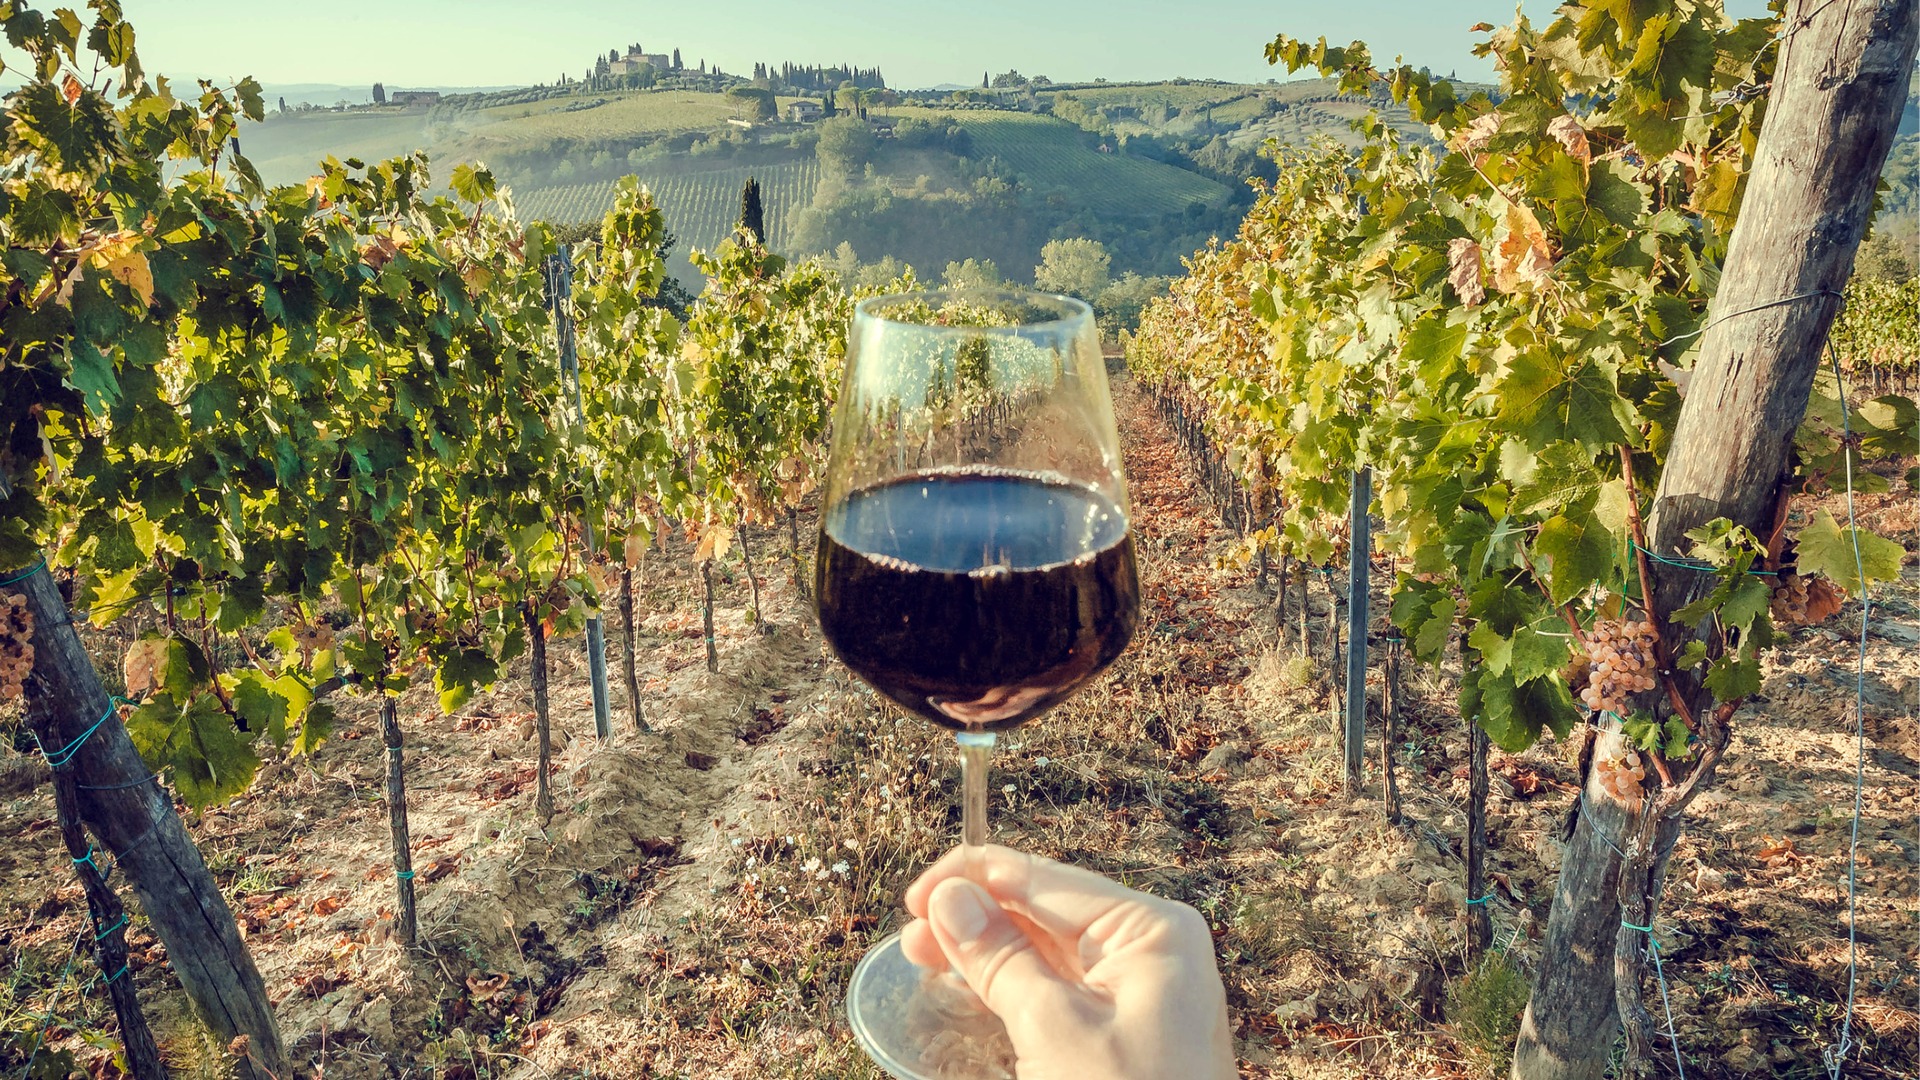 This image shows a hand holding a glass of red wine amid vineyards with the rolling hills of Tuscany in the background. 